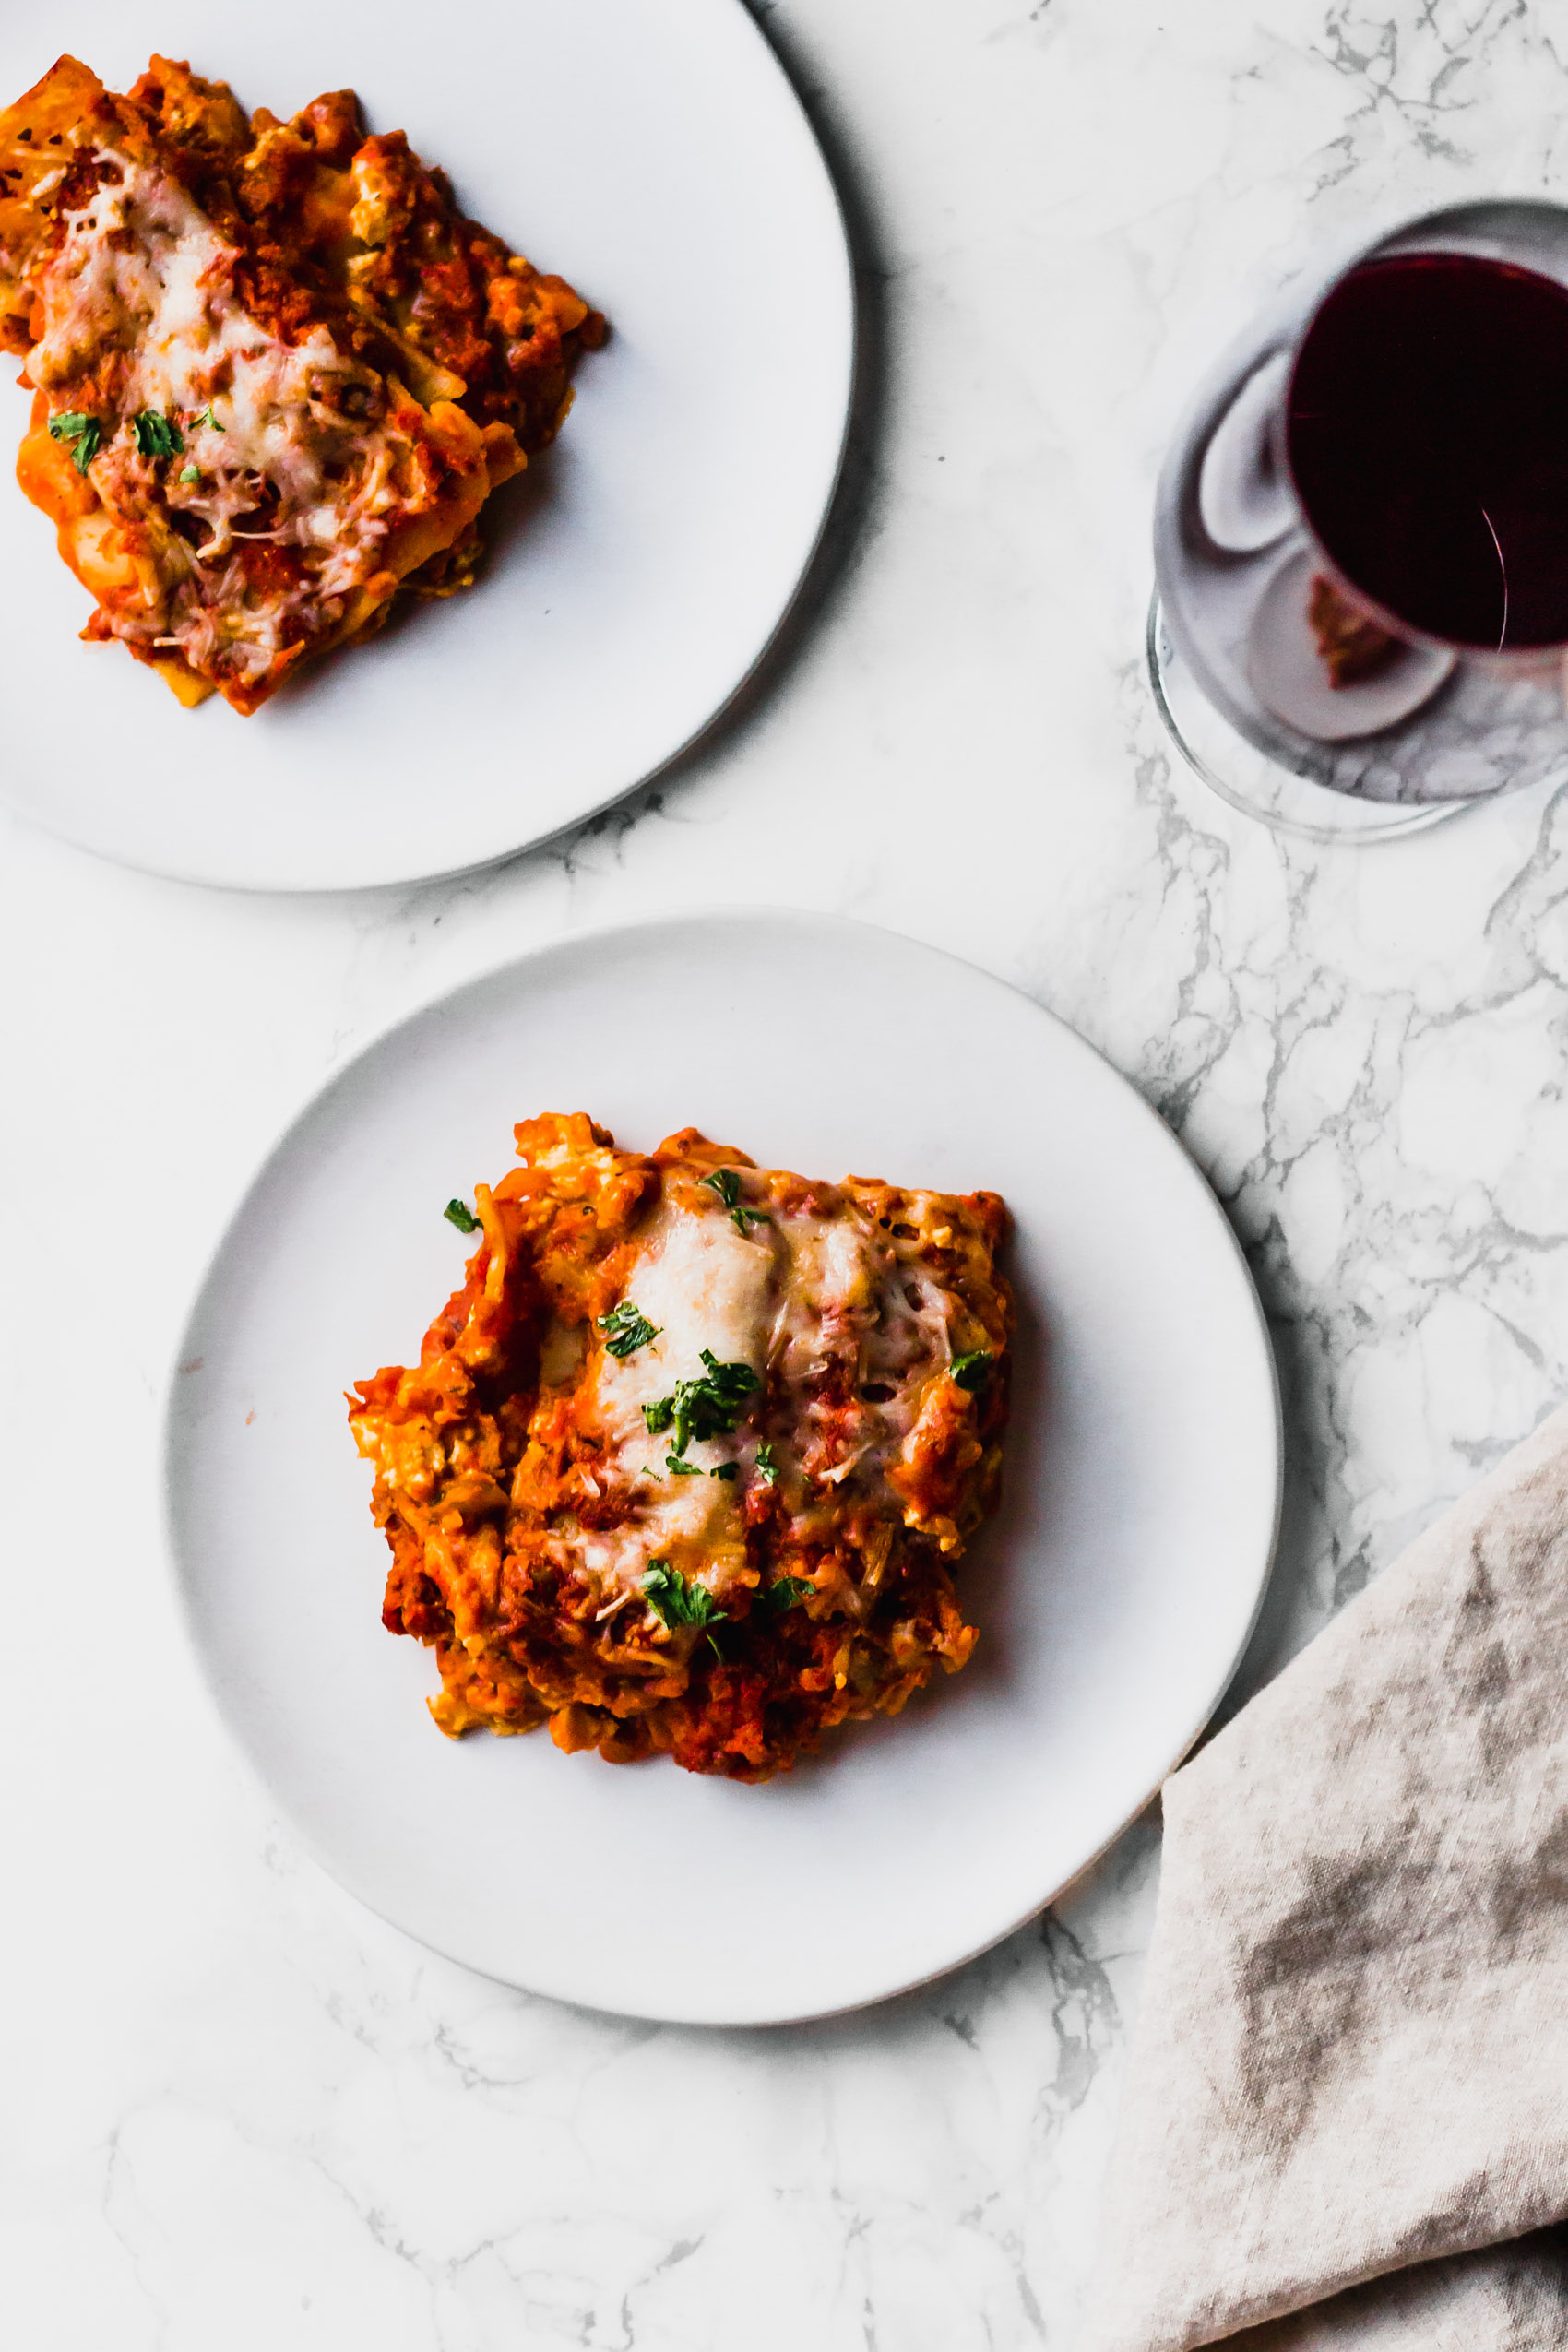 two slices of vegan lasagna served with a glass of red wine